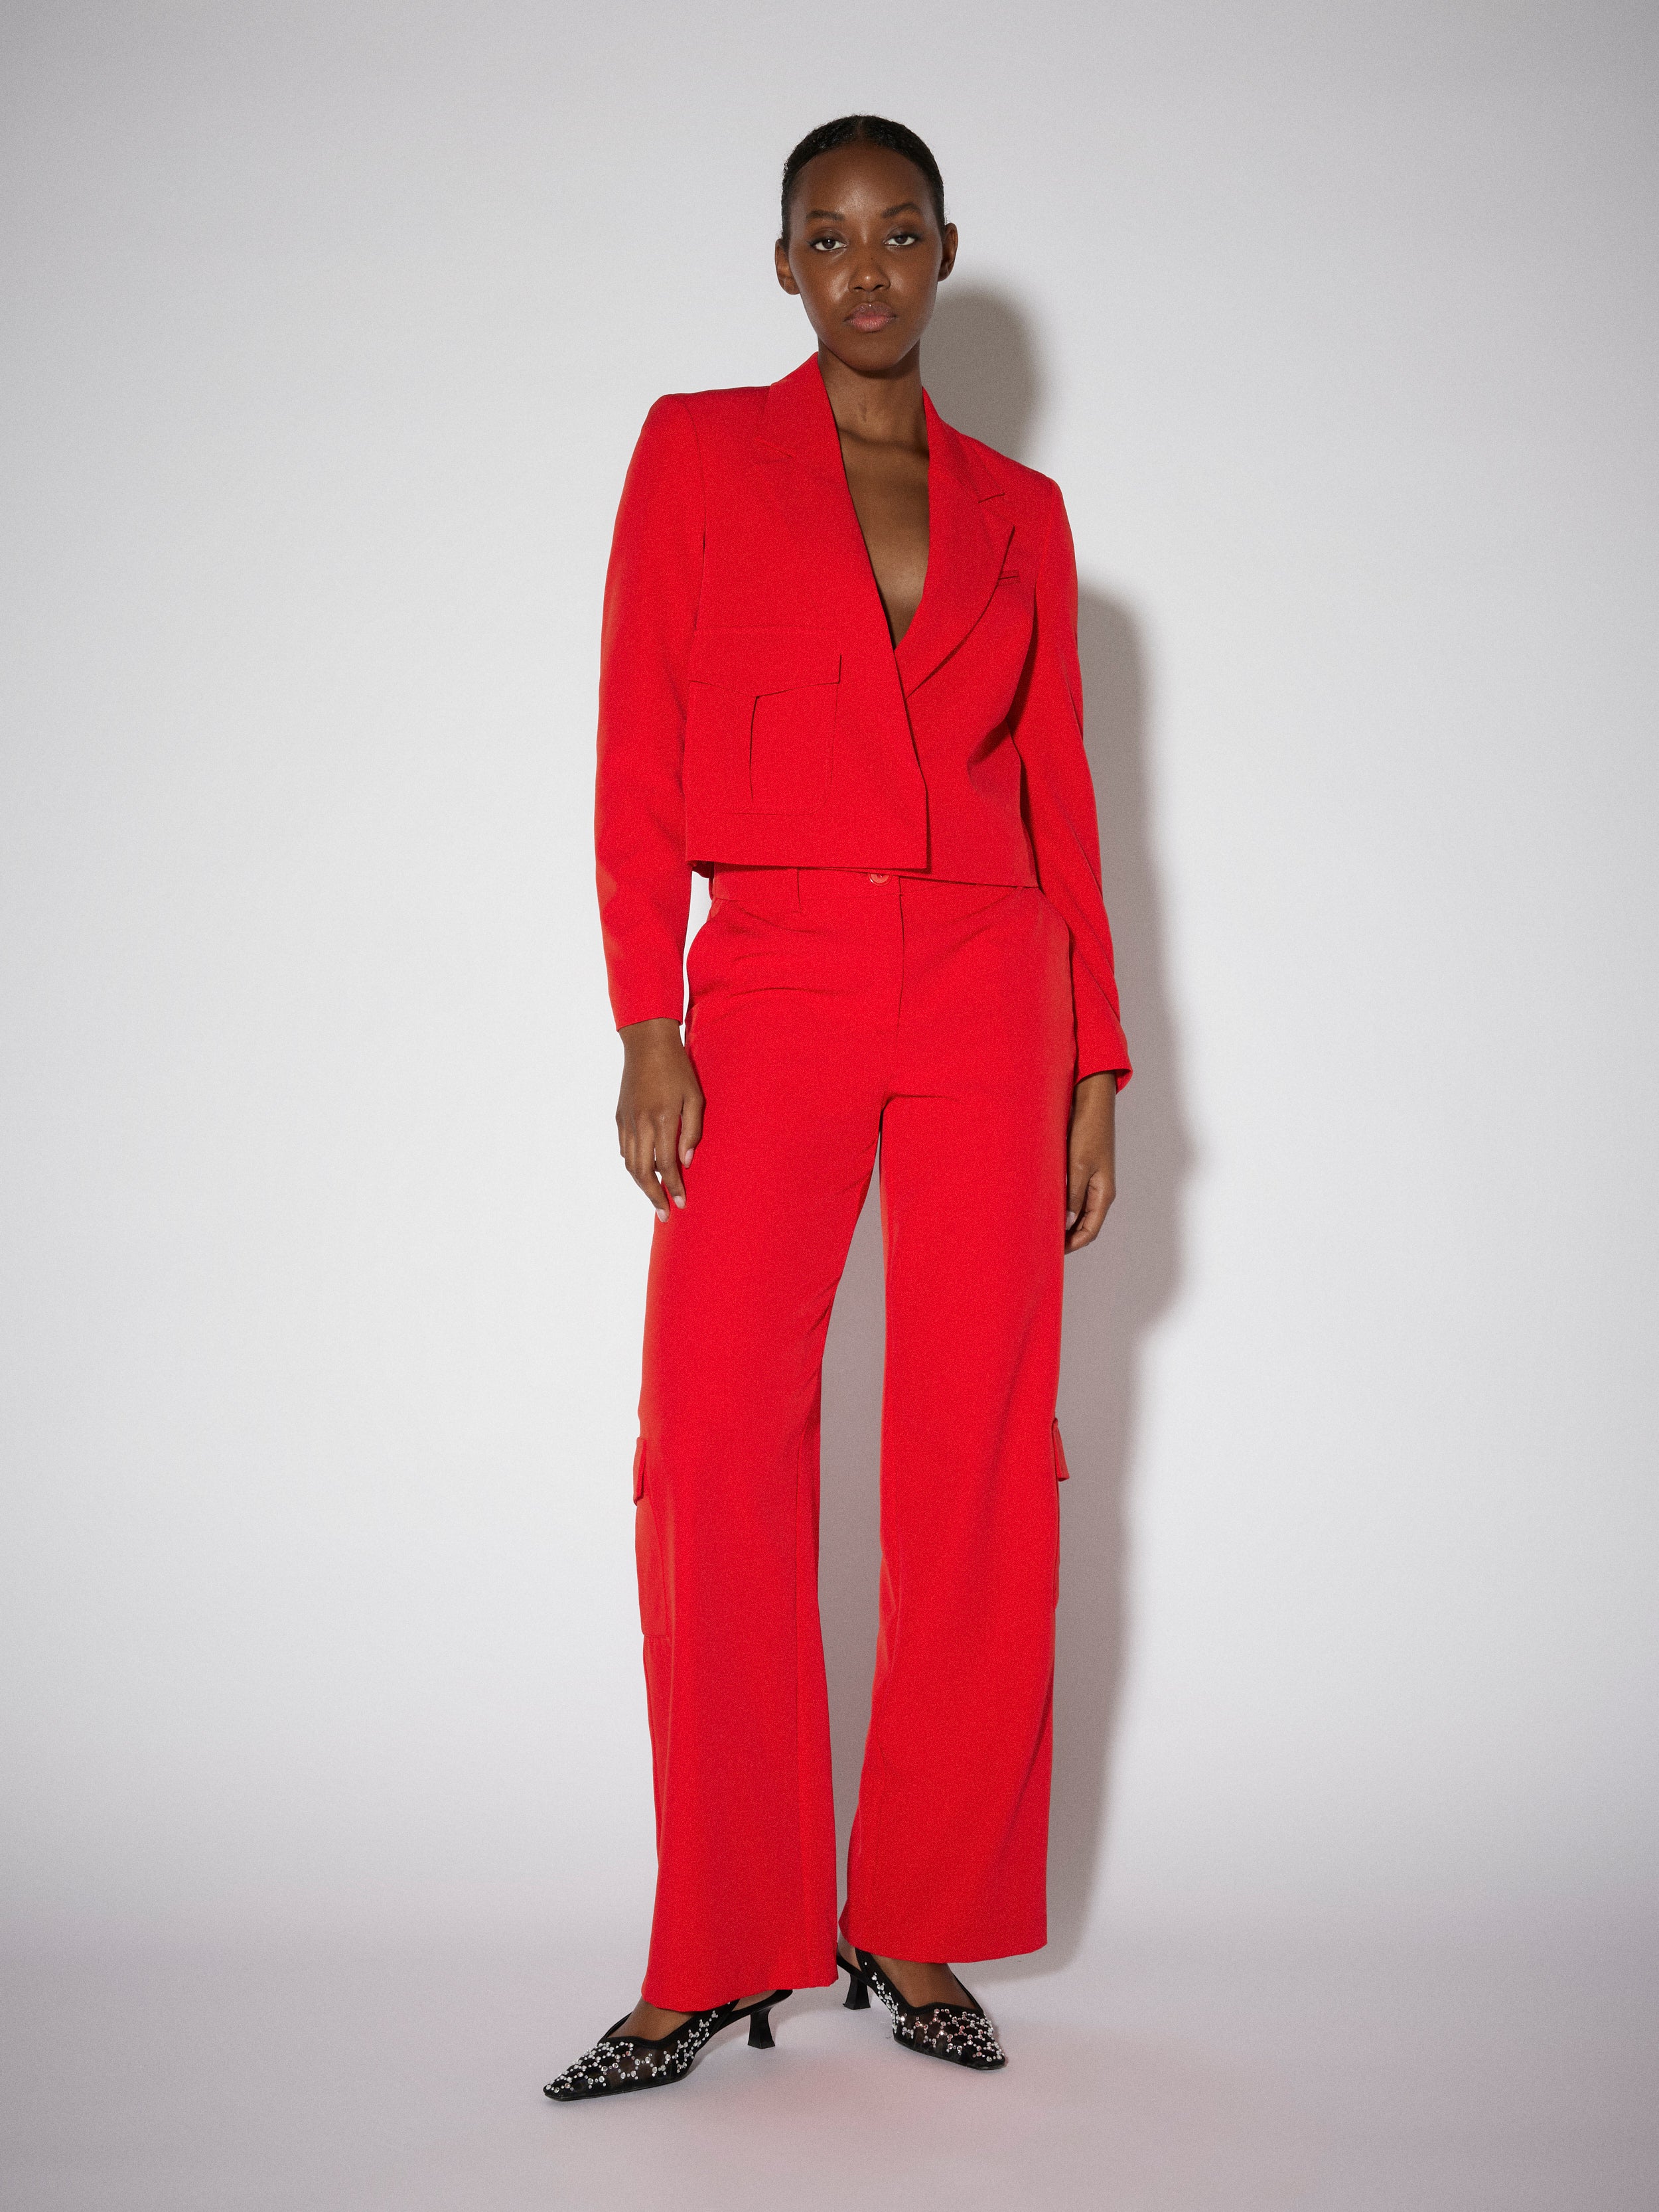 Red Formal Trouser With blazer set Uniform Designs for women Office Pant  Suits | eBay